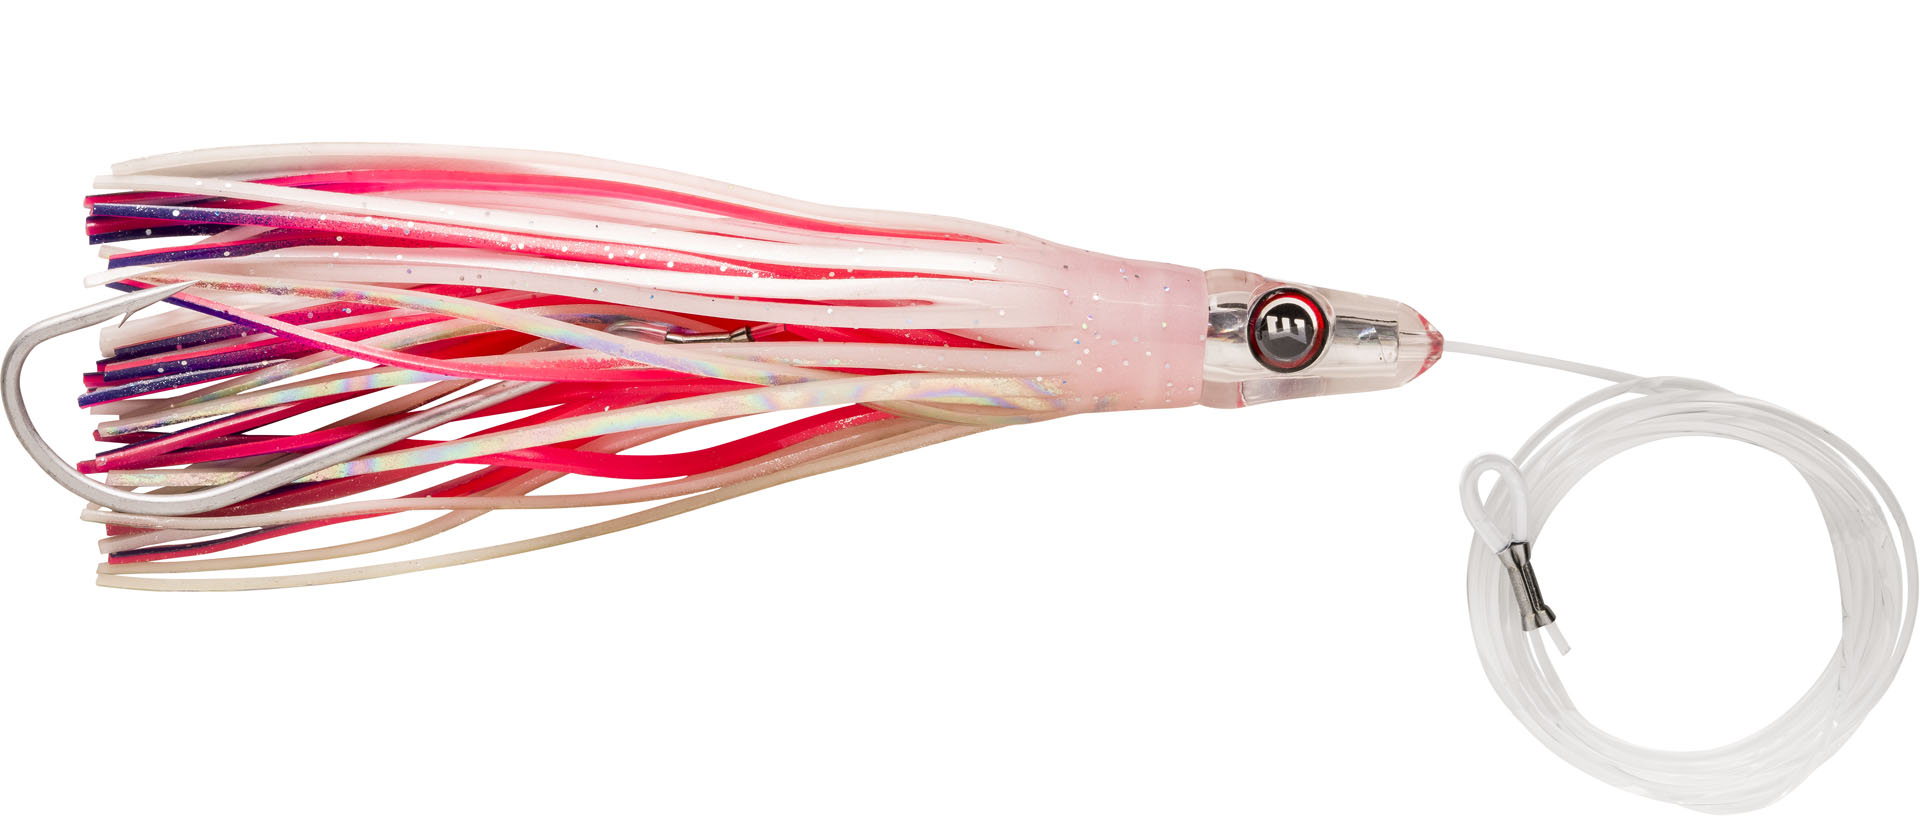 Williamson Tuna Catcher Rigged Meeres Rig 14cm (60g) - Candy Floss